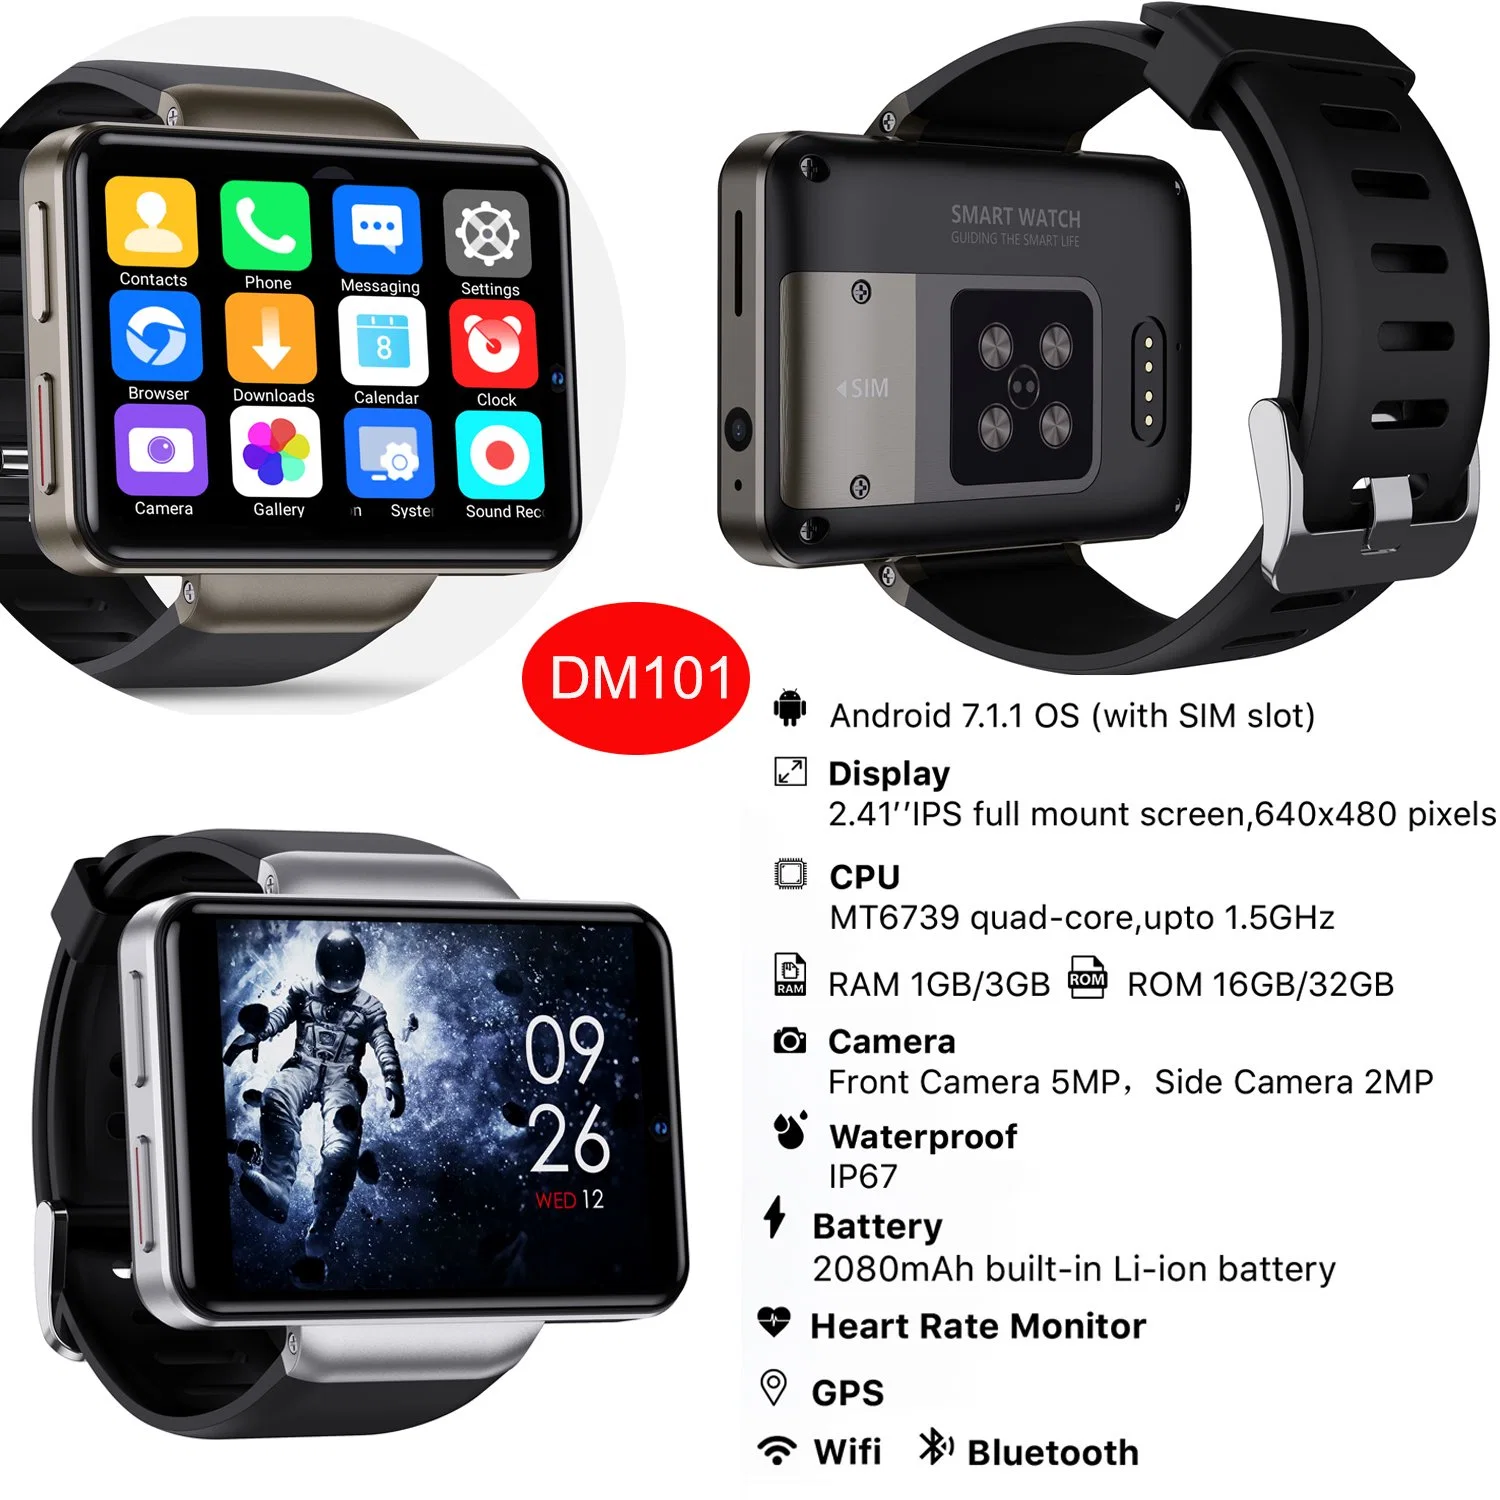 New Smartwatch IP67 Waterproof GPS 2.41inch Android Smart Watch 4G Mobile Phone with WiFi Video Calling Heart Rate Monitor DM101